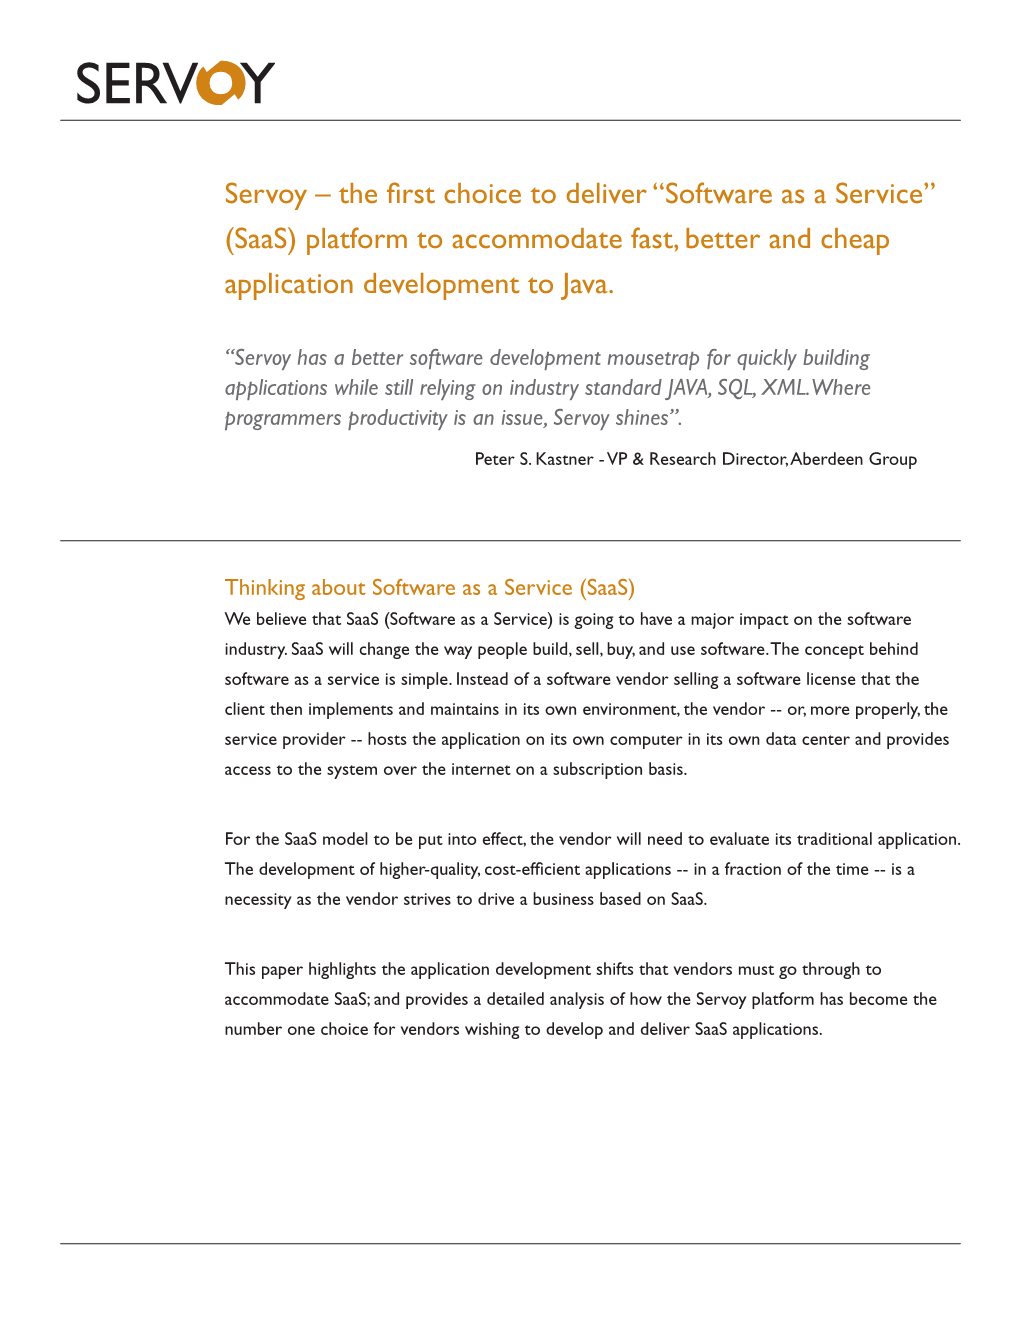 Servoy – the First Choice to Deliver “Software As a Service” (Saas) Platform to Accommodate Fast, Better and Cheap Application Development to Java